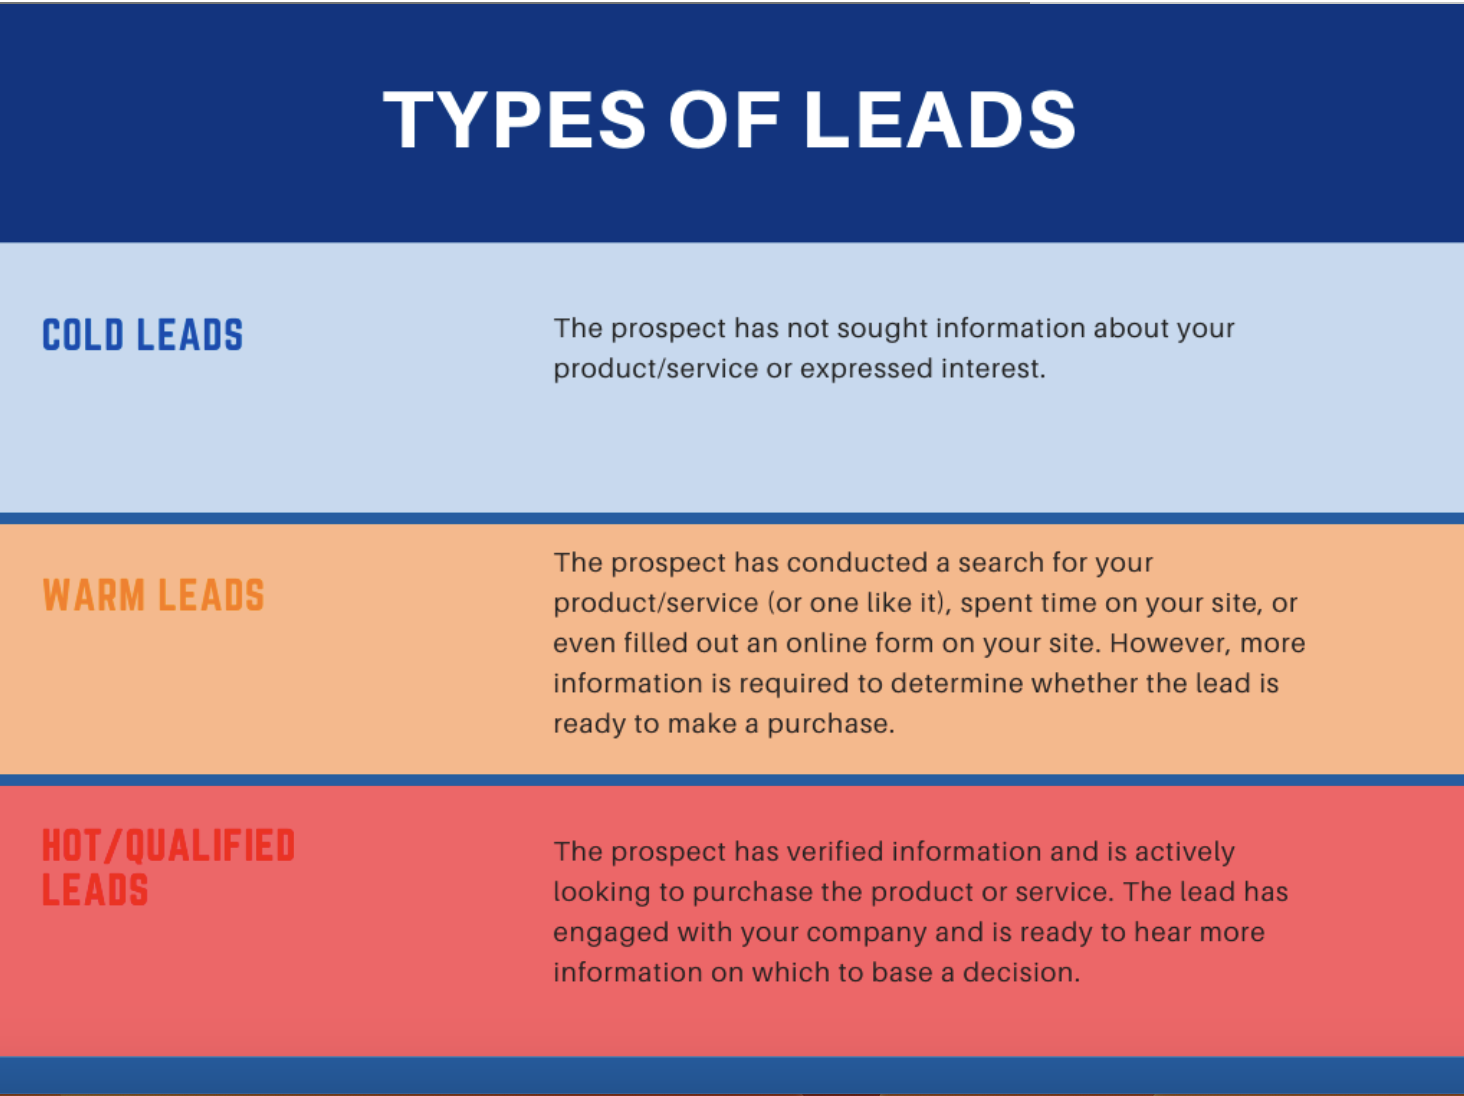 Infographic of Types of leads, showing cold, warm, and hot leads with a short description under each 